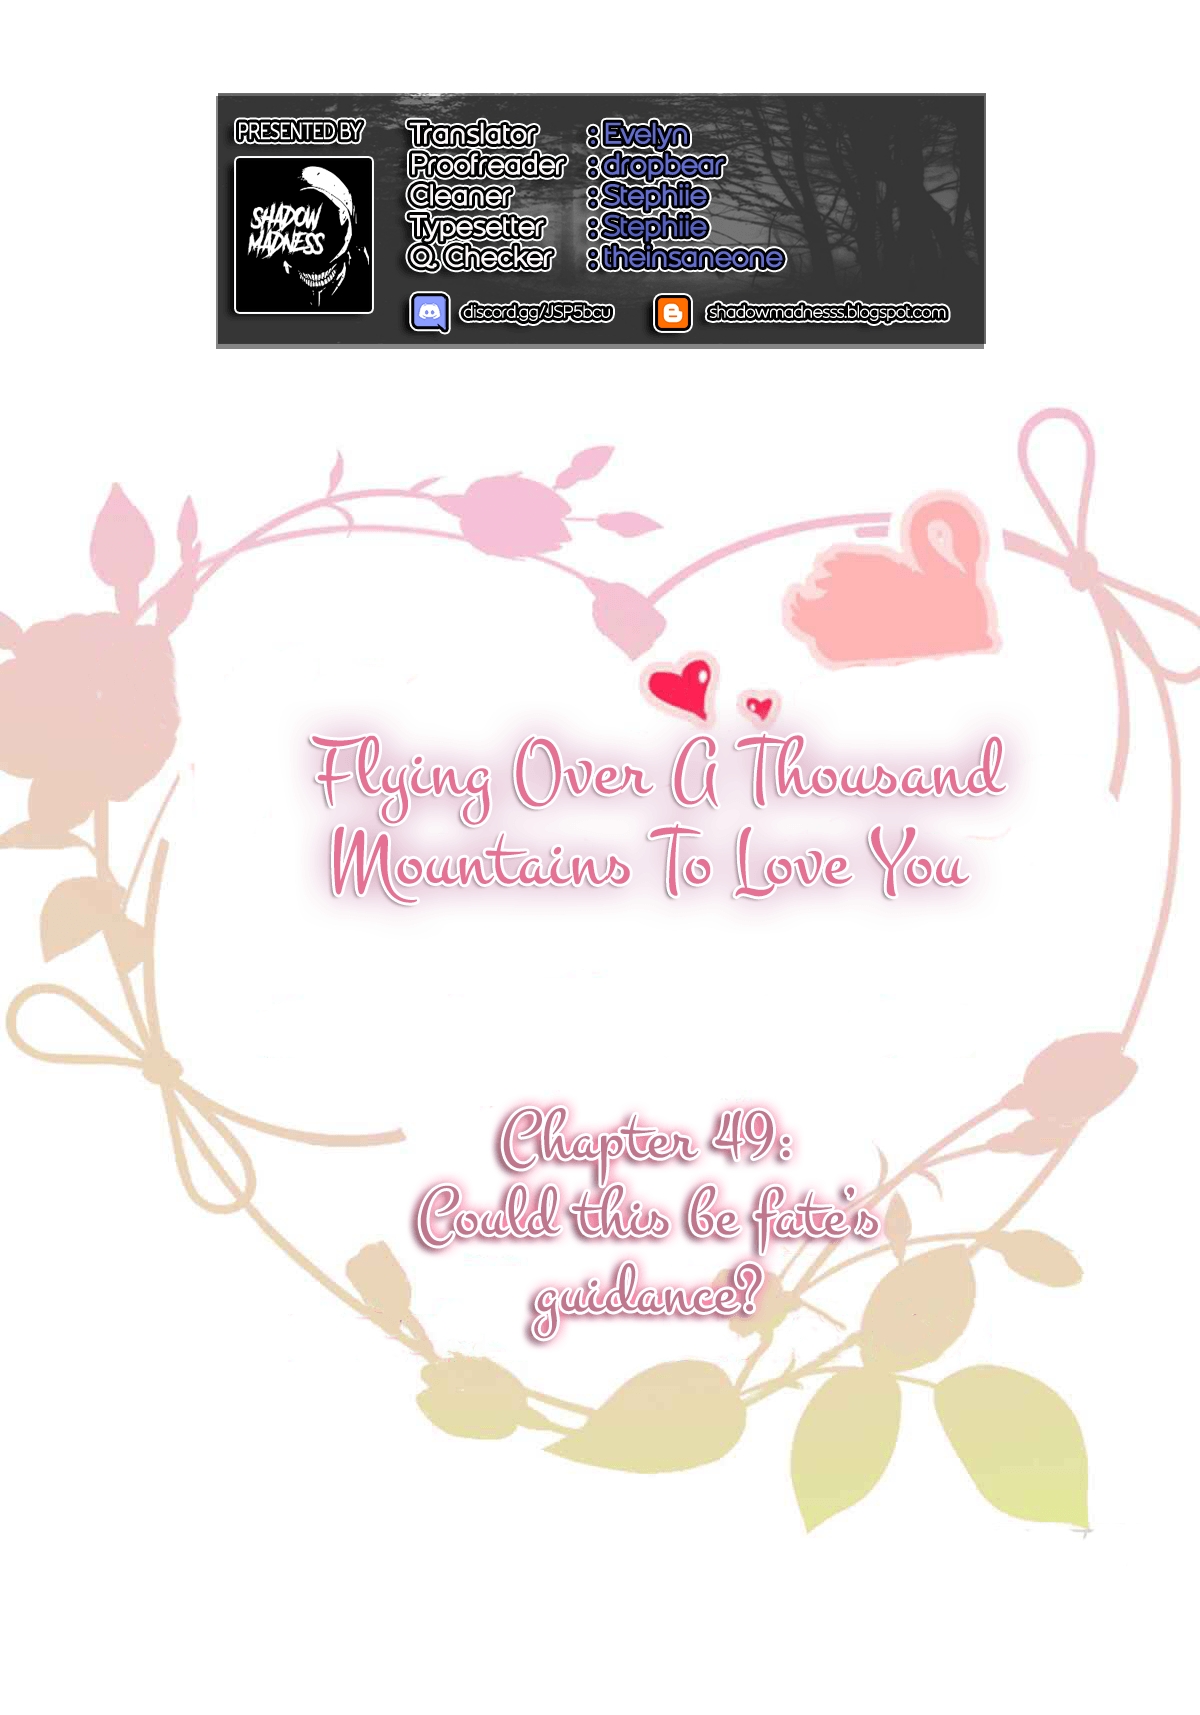 Flying Over a Thousand Mountains to Love You Ch. 49 Could this be fate's guidance?